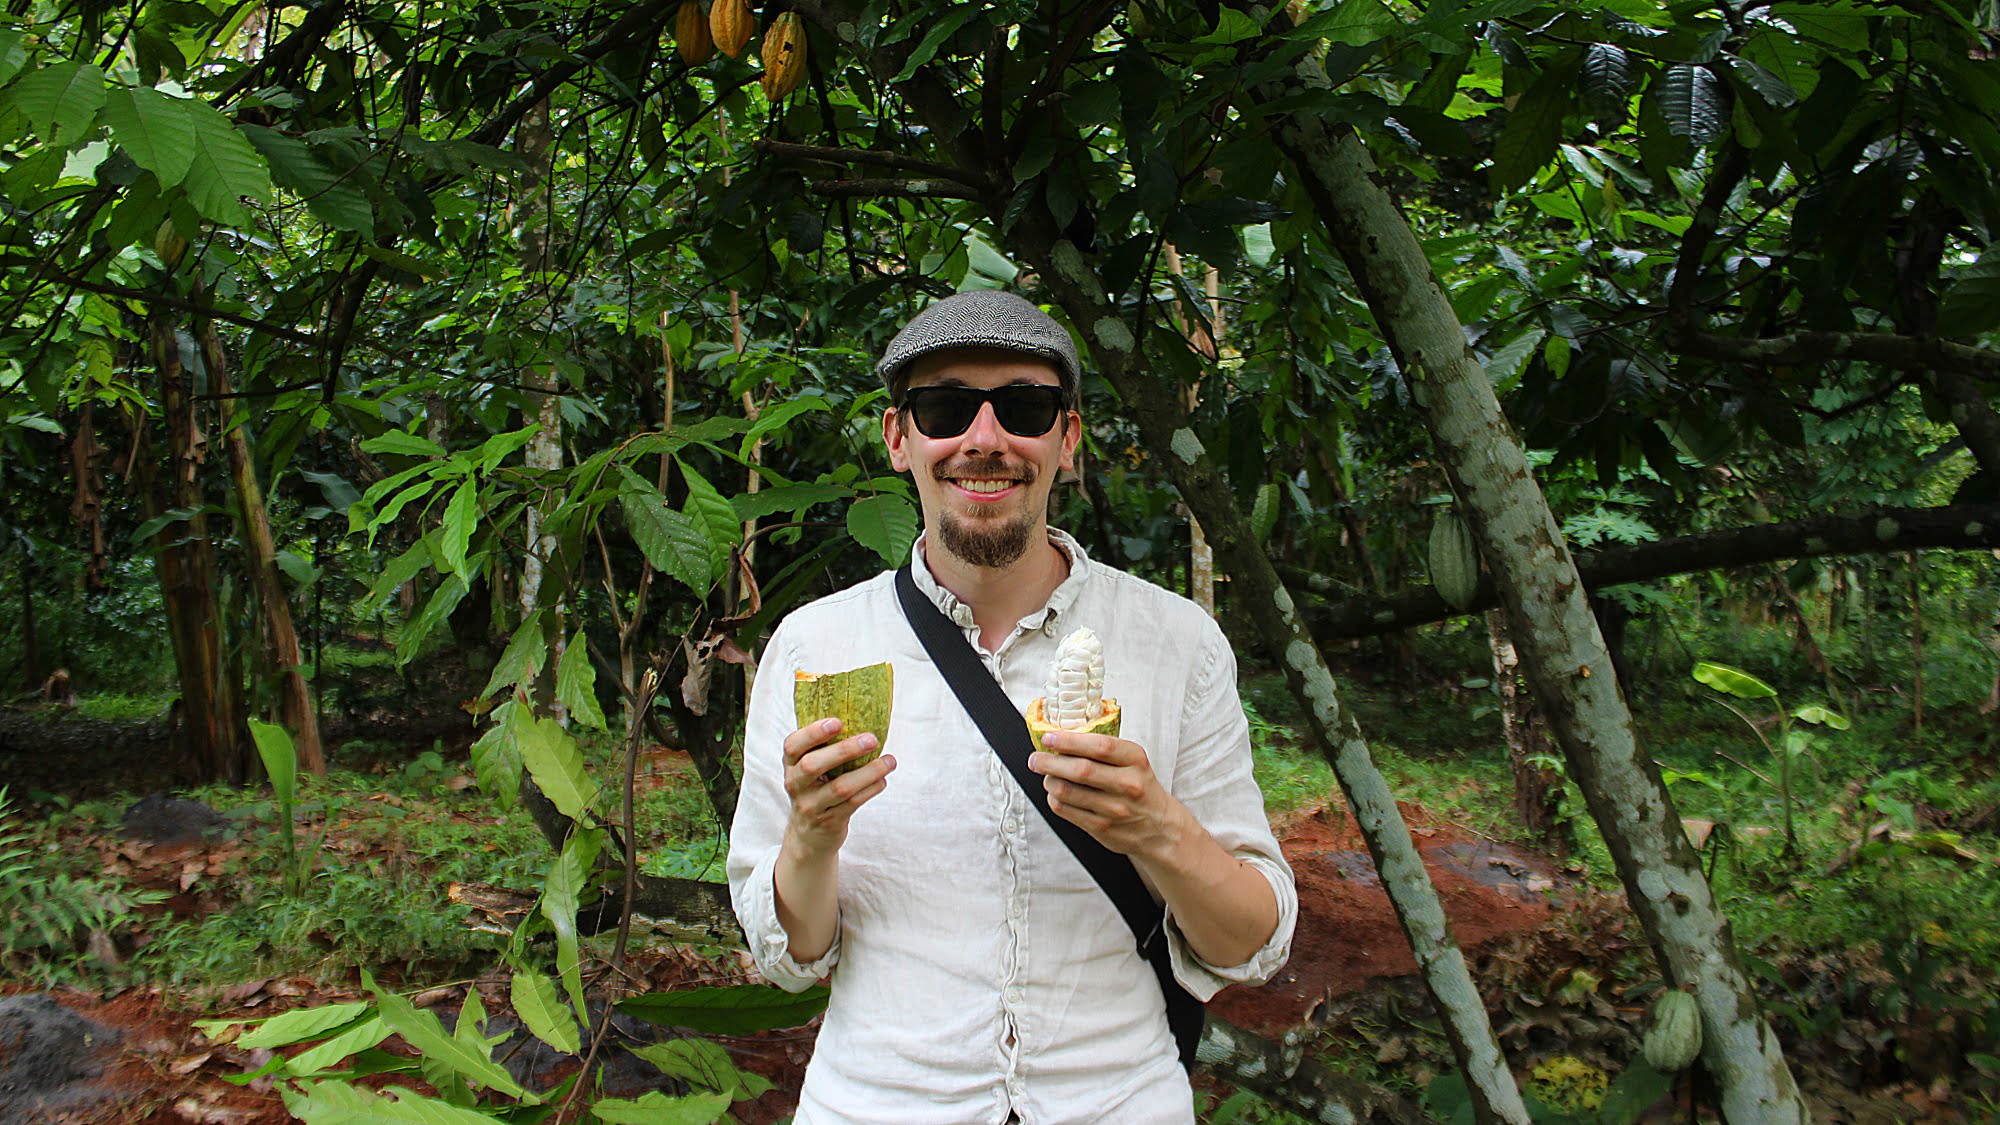 Tourist visiting Kerala during the monsoon season holding and tasting a fresh cacao fruit from a tree.